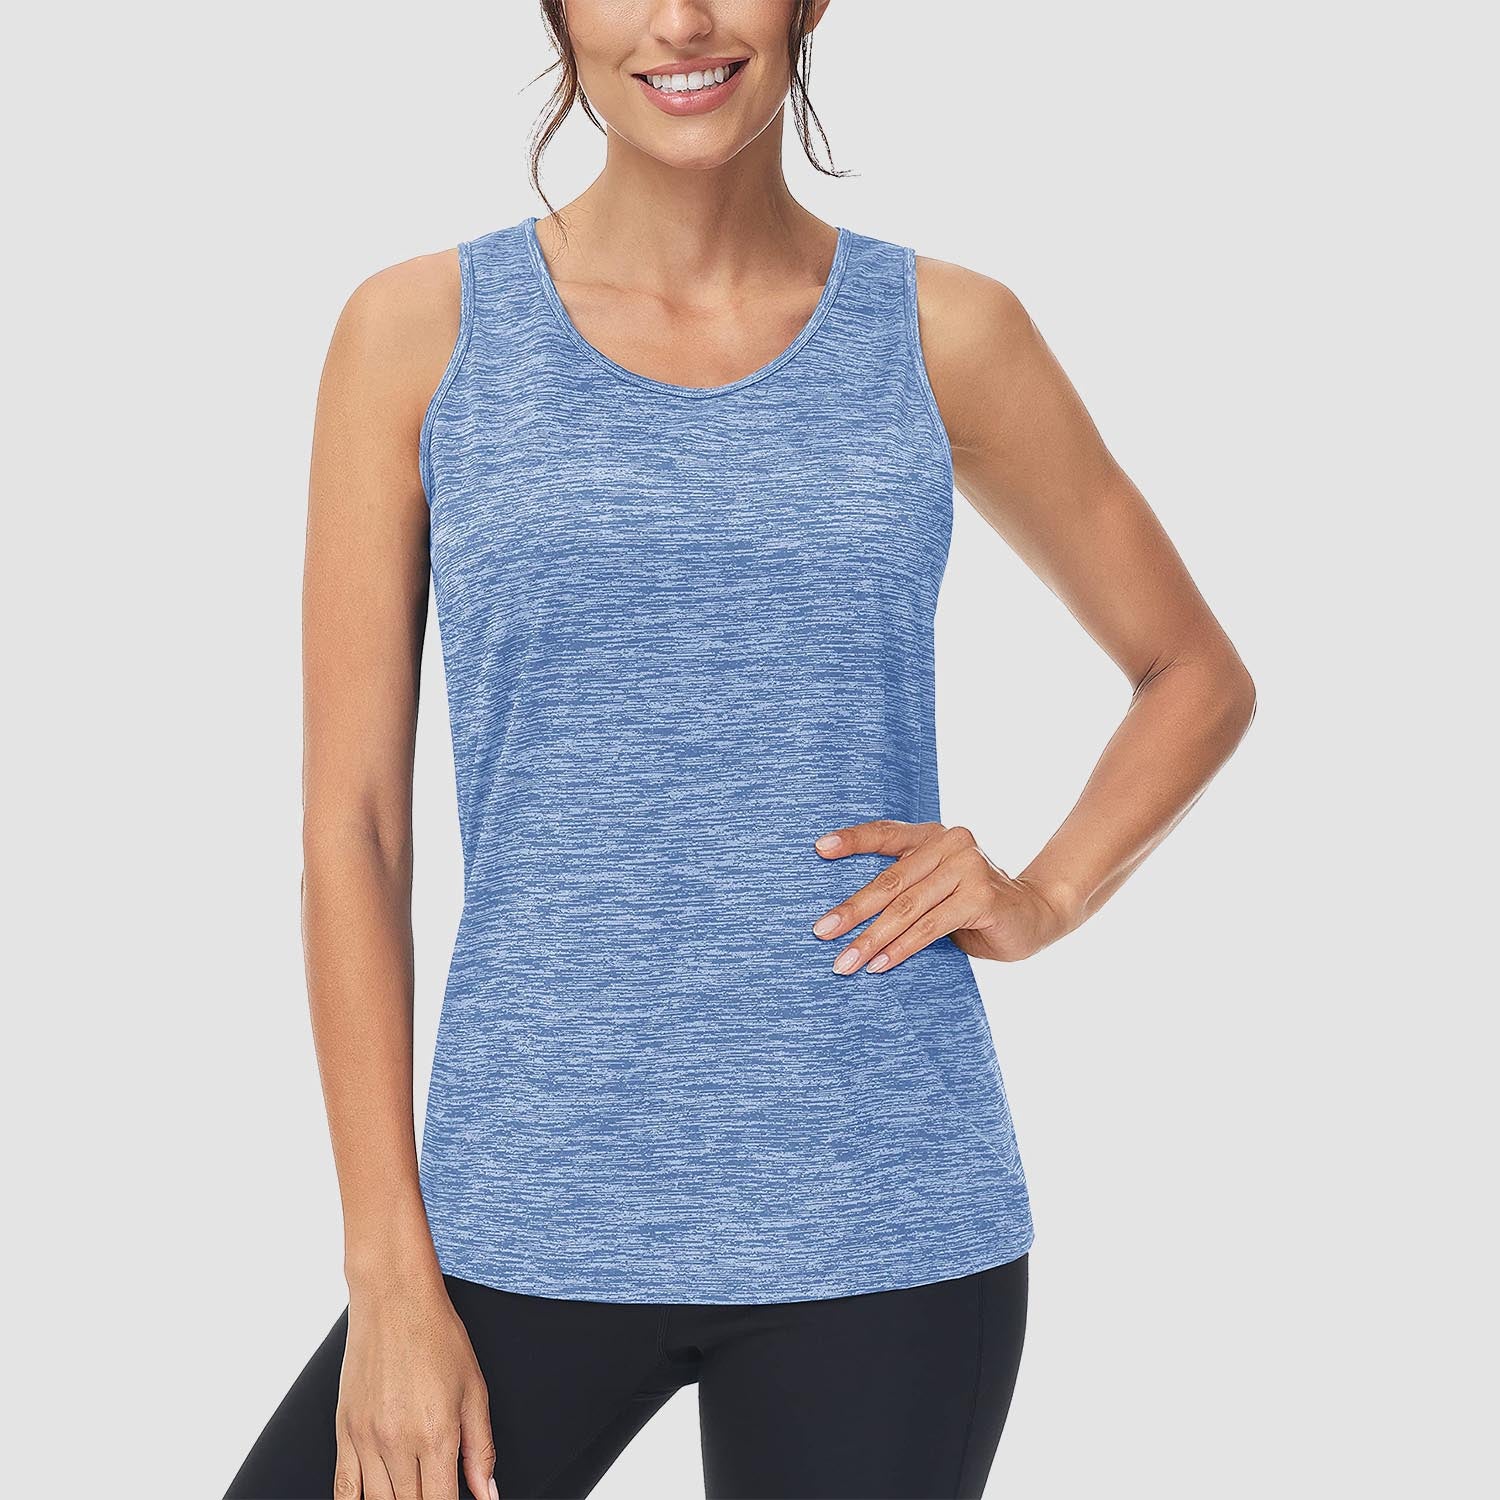 Women's Workout Tank Tops Quick Dry Sleeveless Running Athletic Shirts Moisture Wicking Top